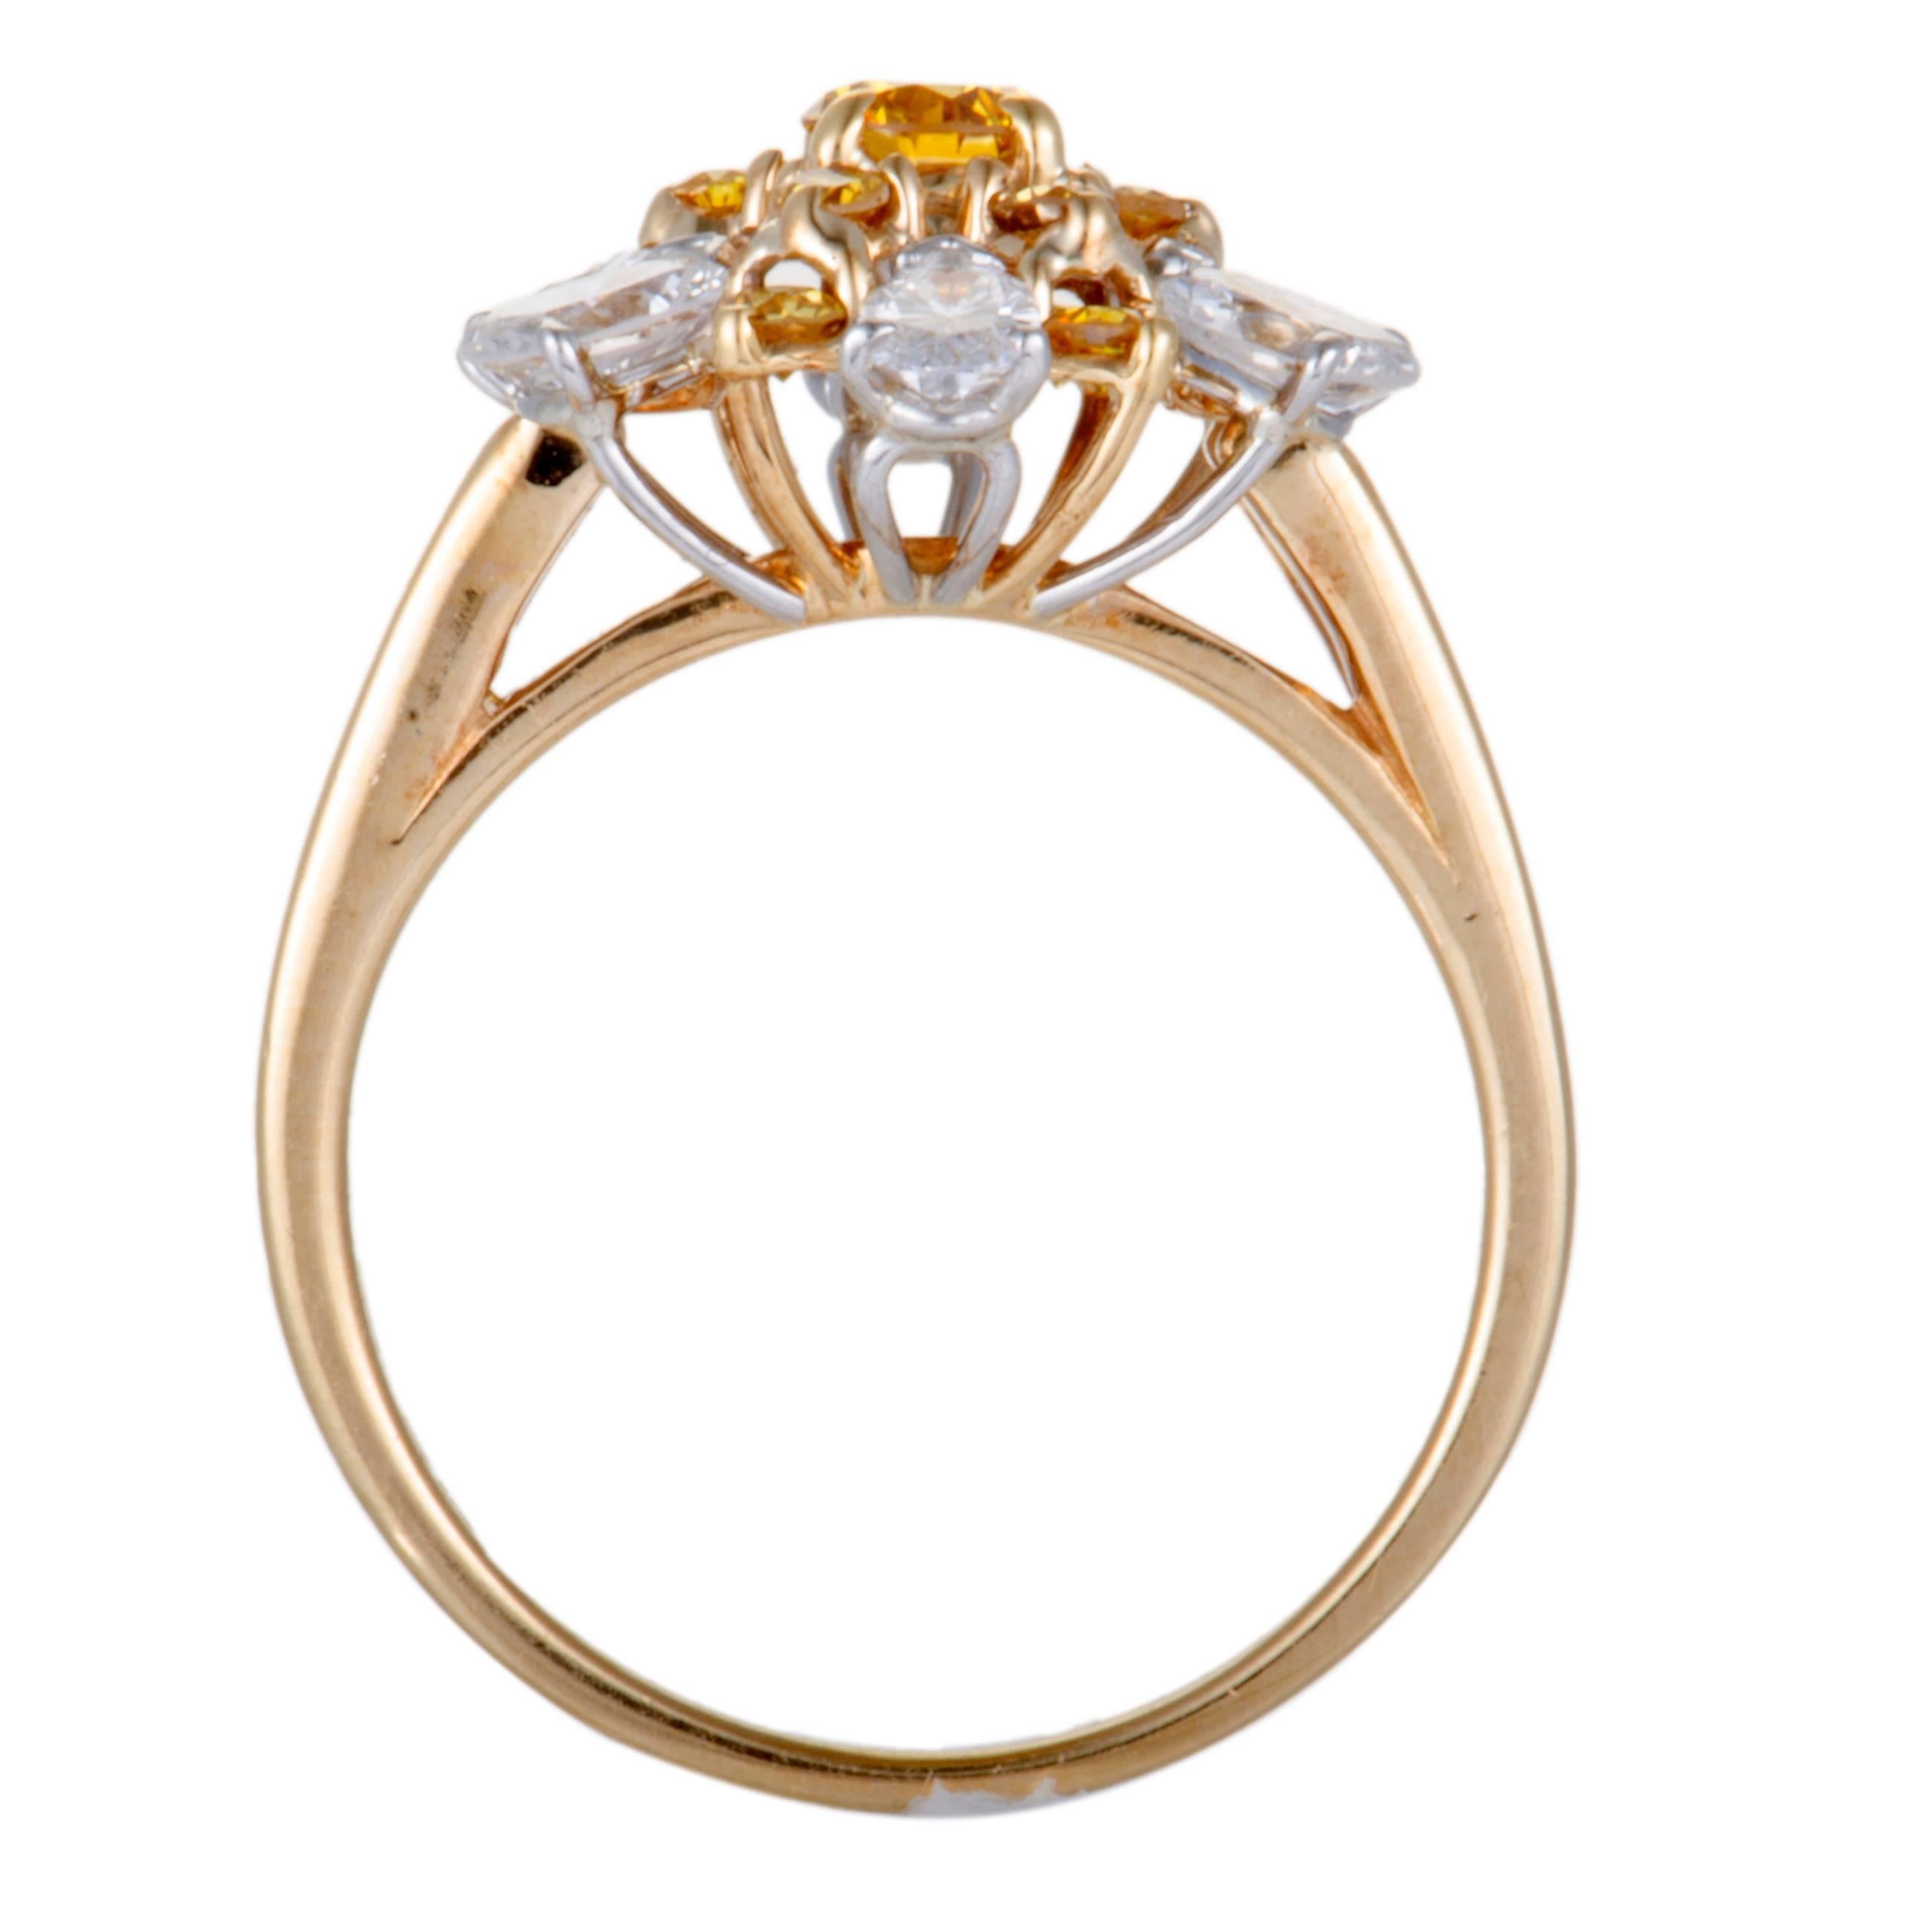 A compelling combination of resplendent white diamonds, weighing 1.20ct, and yellow diamonds, weighing 0.55ct, is featured in this stunning ring by Oscar Heyman that offers an incredibly luxurious appearance. The ring is beautifully crafted in a mix